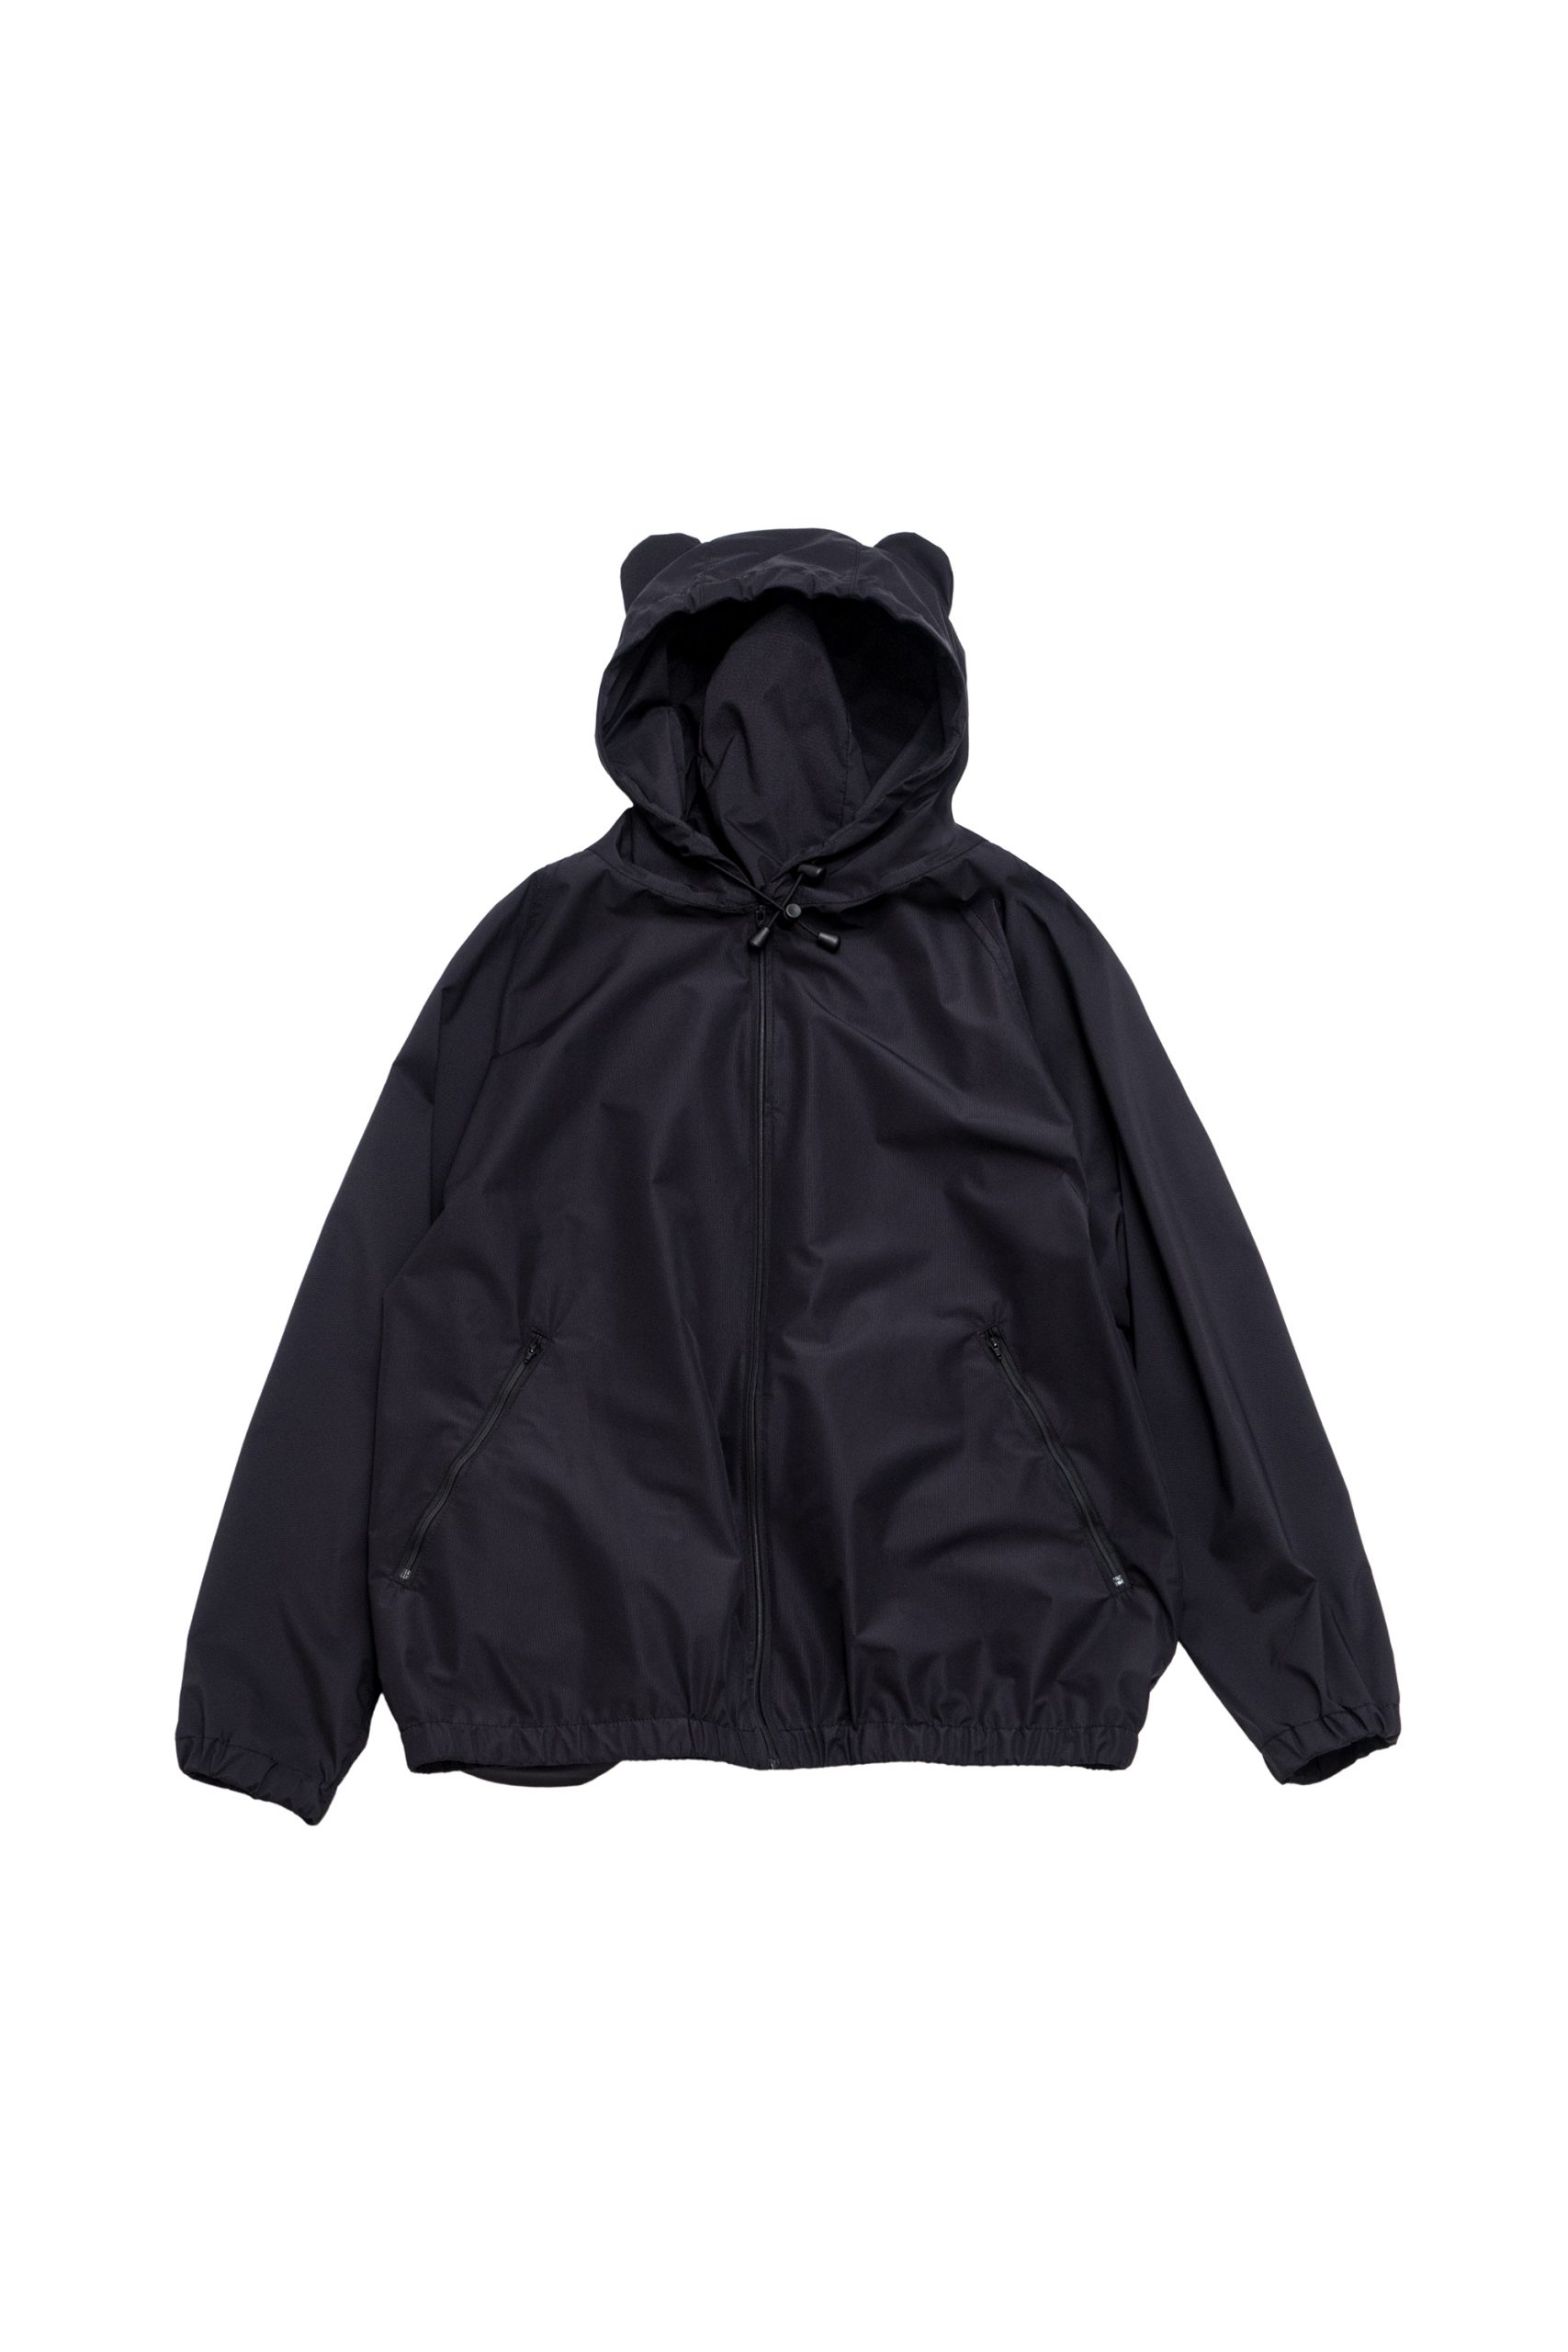 PHINGERIN CUMALICE PACKABLE JACKET,正規取扱い,販売店舗 , 福岡から